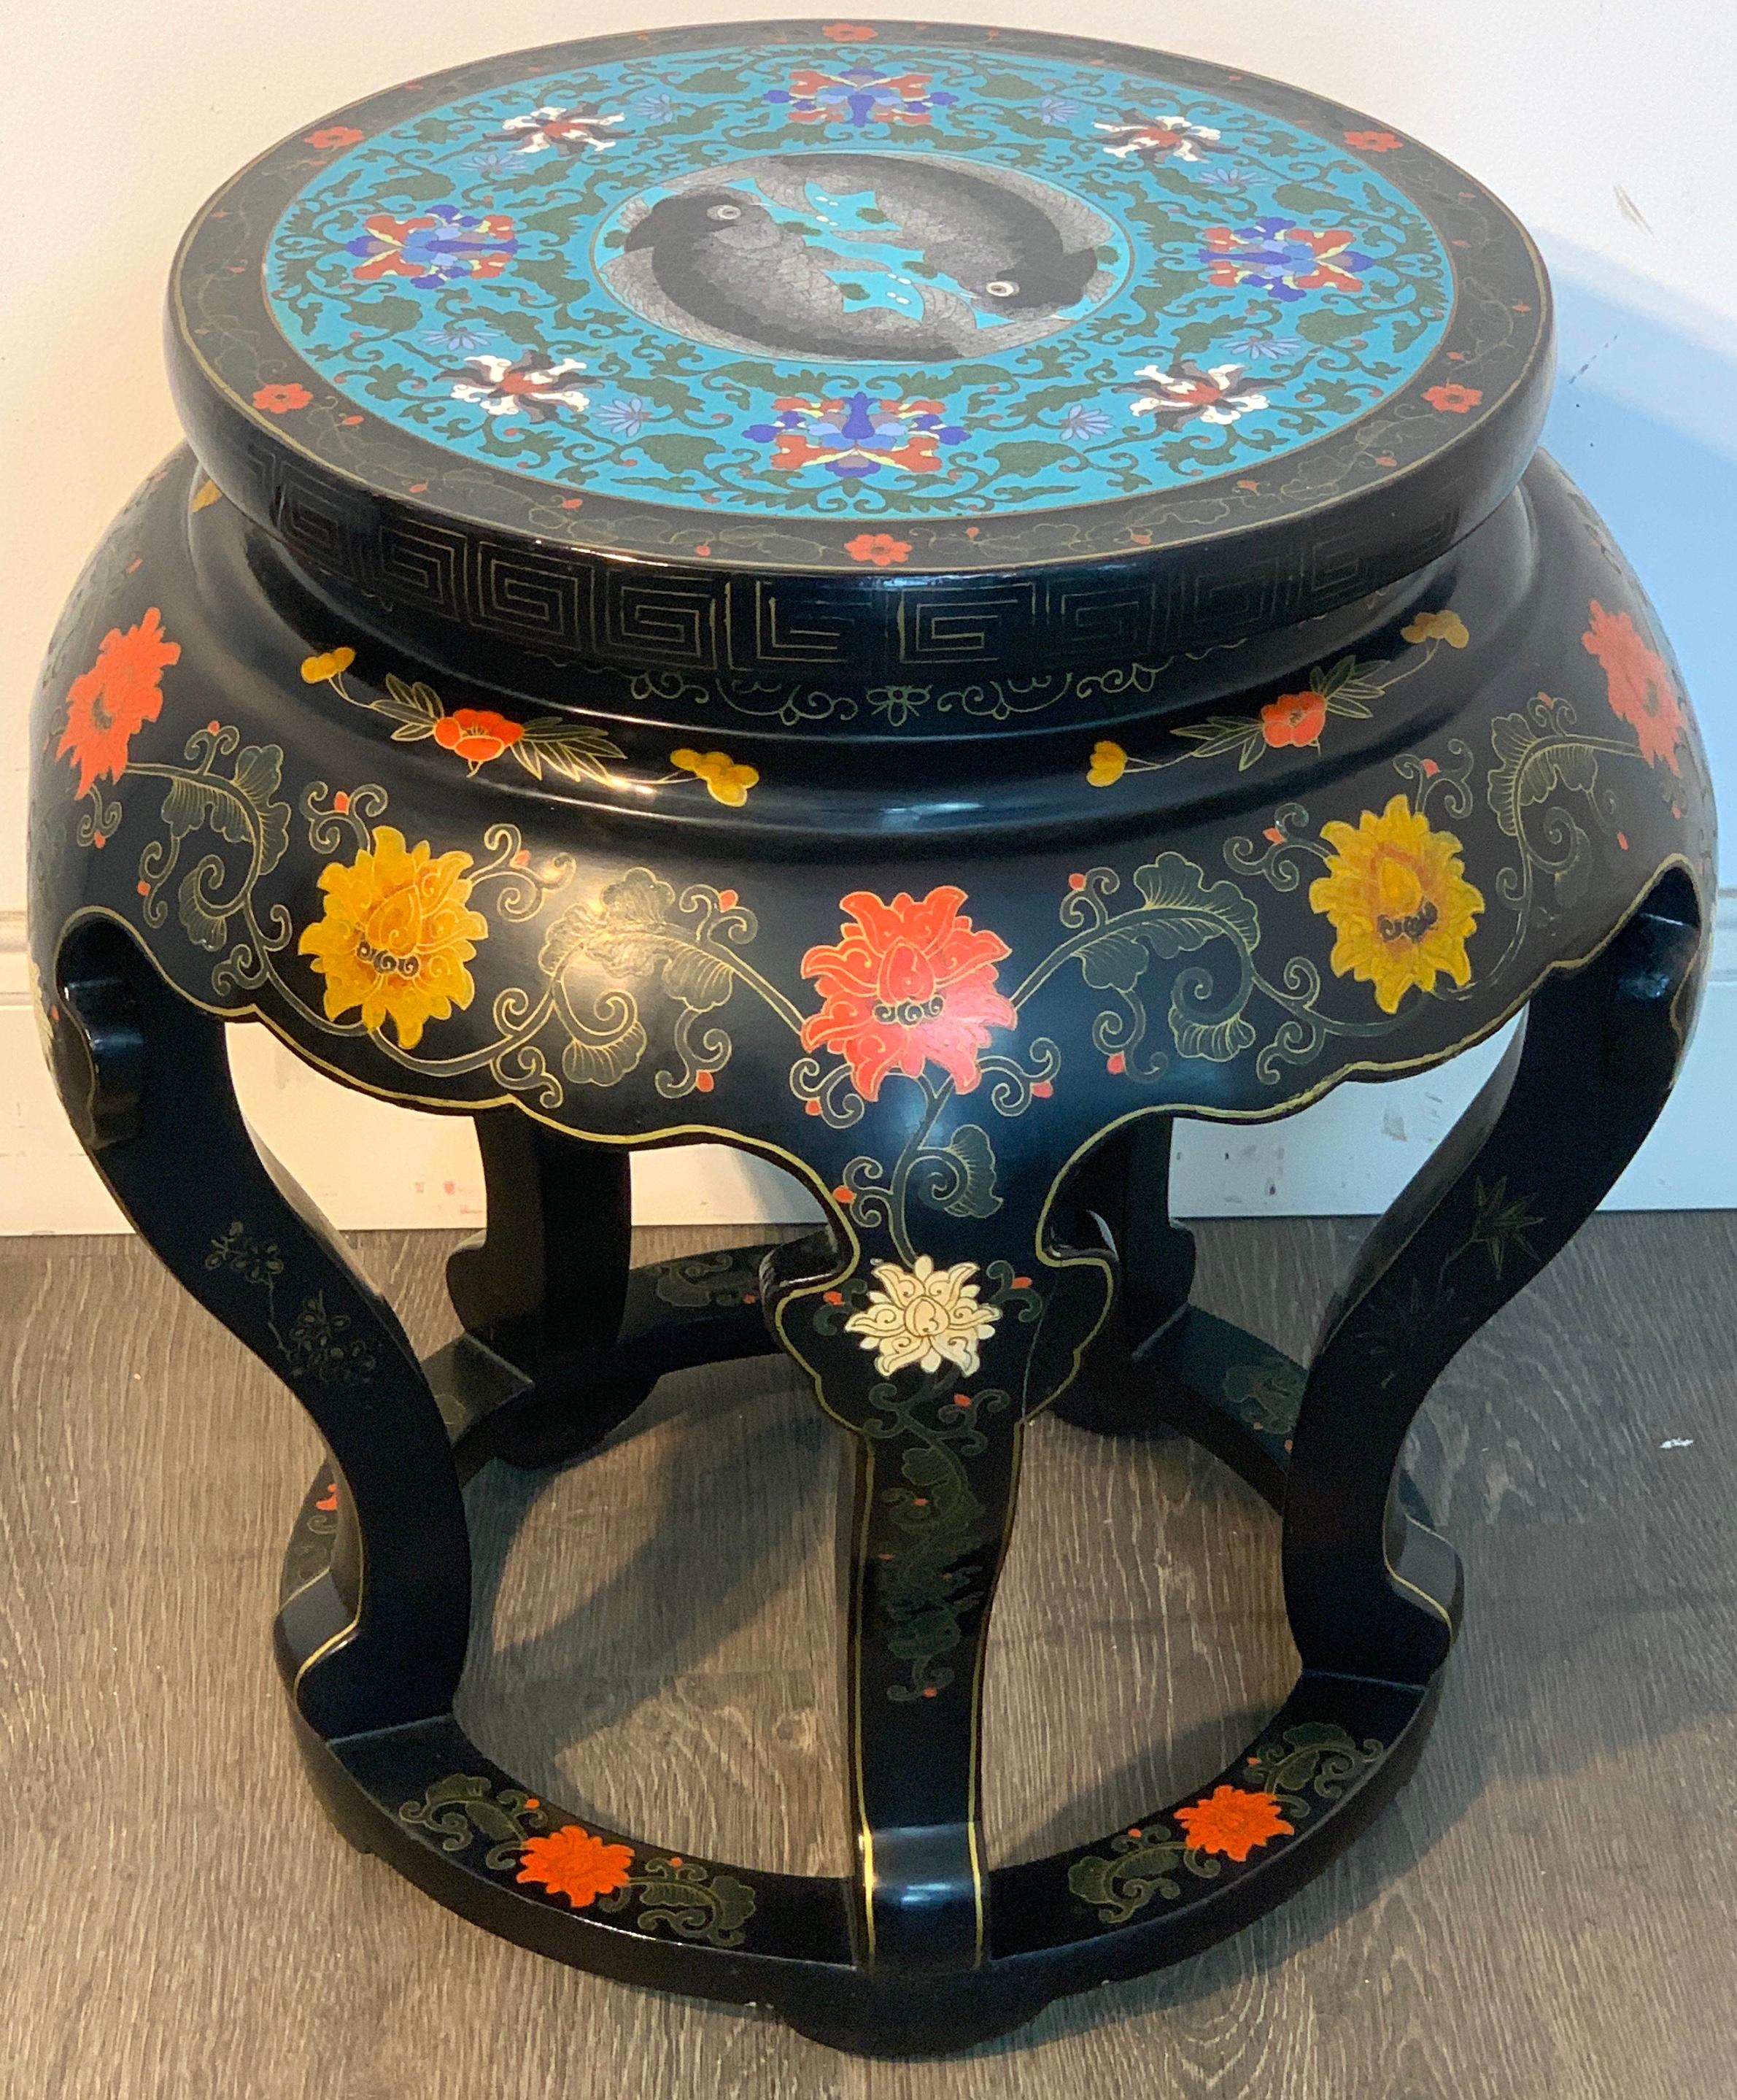 Chinese export black lacquer cloisonné koi motif table, with a 15-inch diameter koi motif cloisonné plaque, raised on floral incised polychromed lacquer base.
The table has a 19